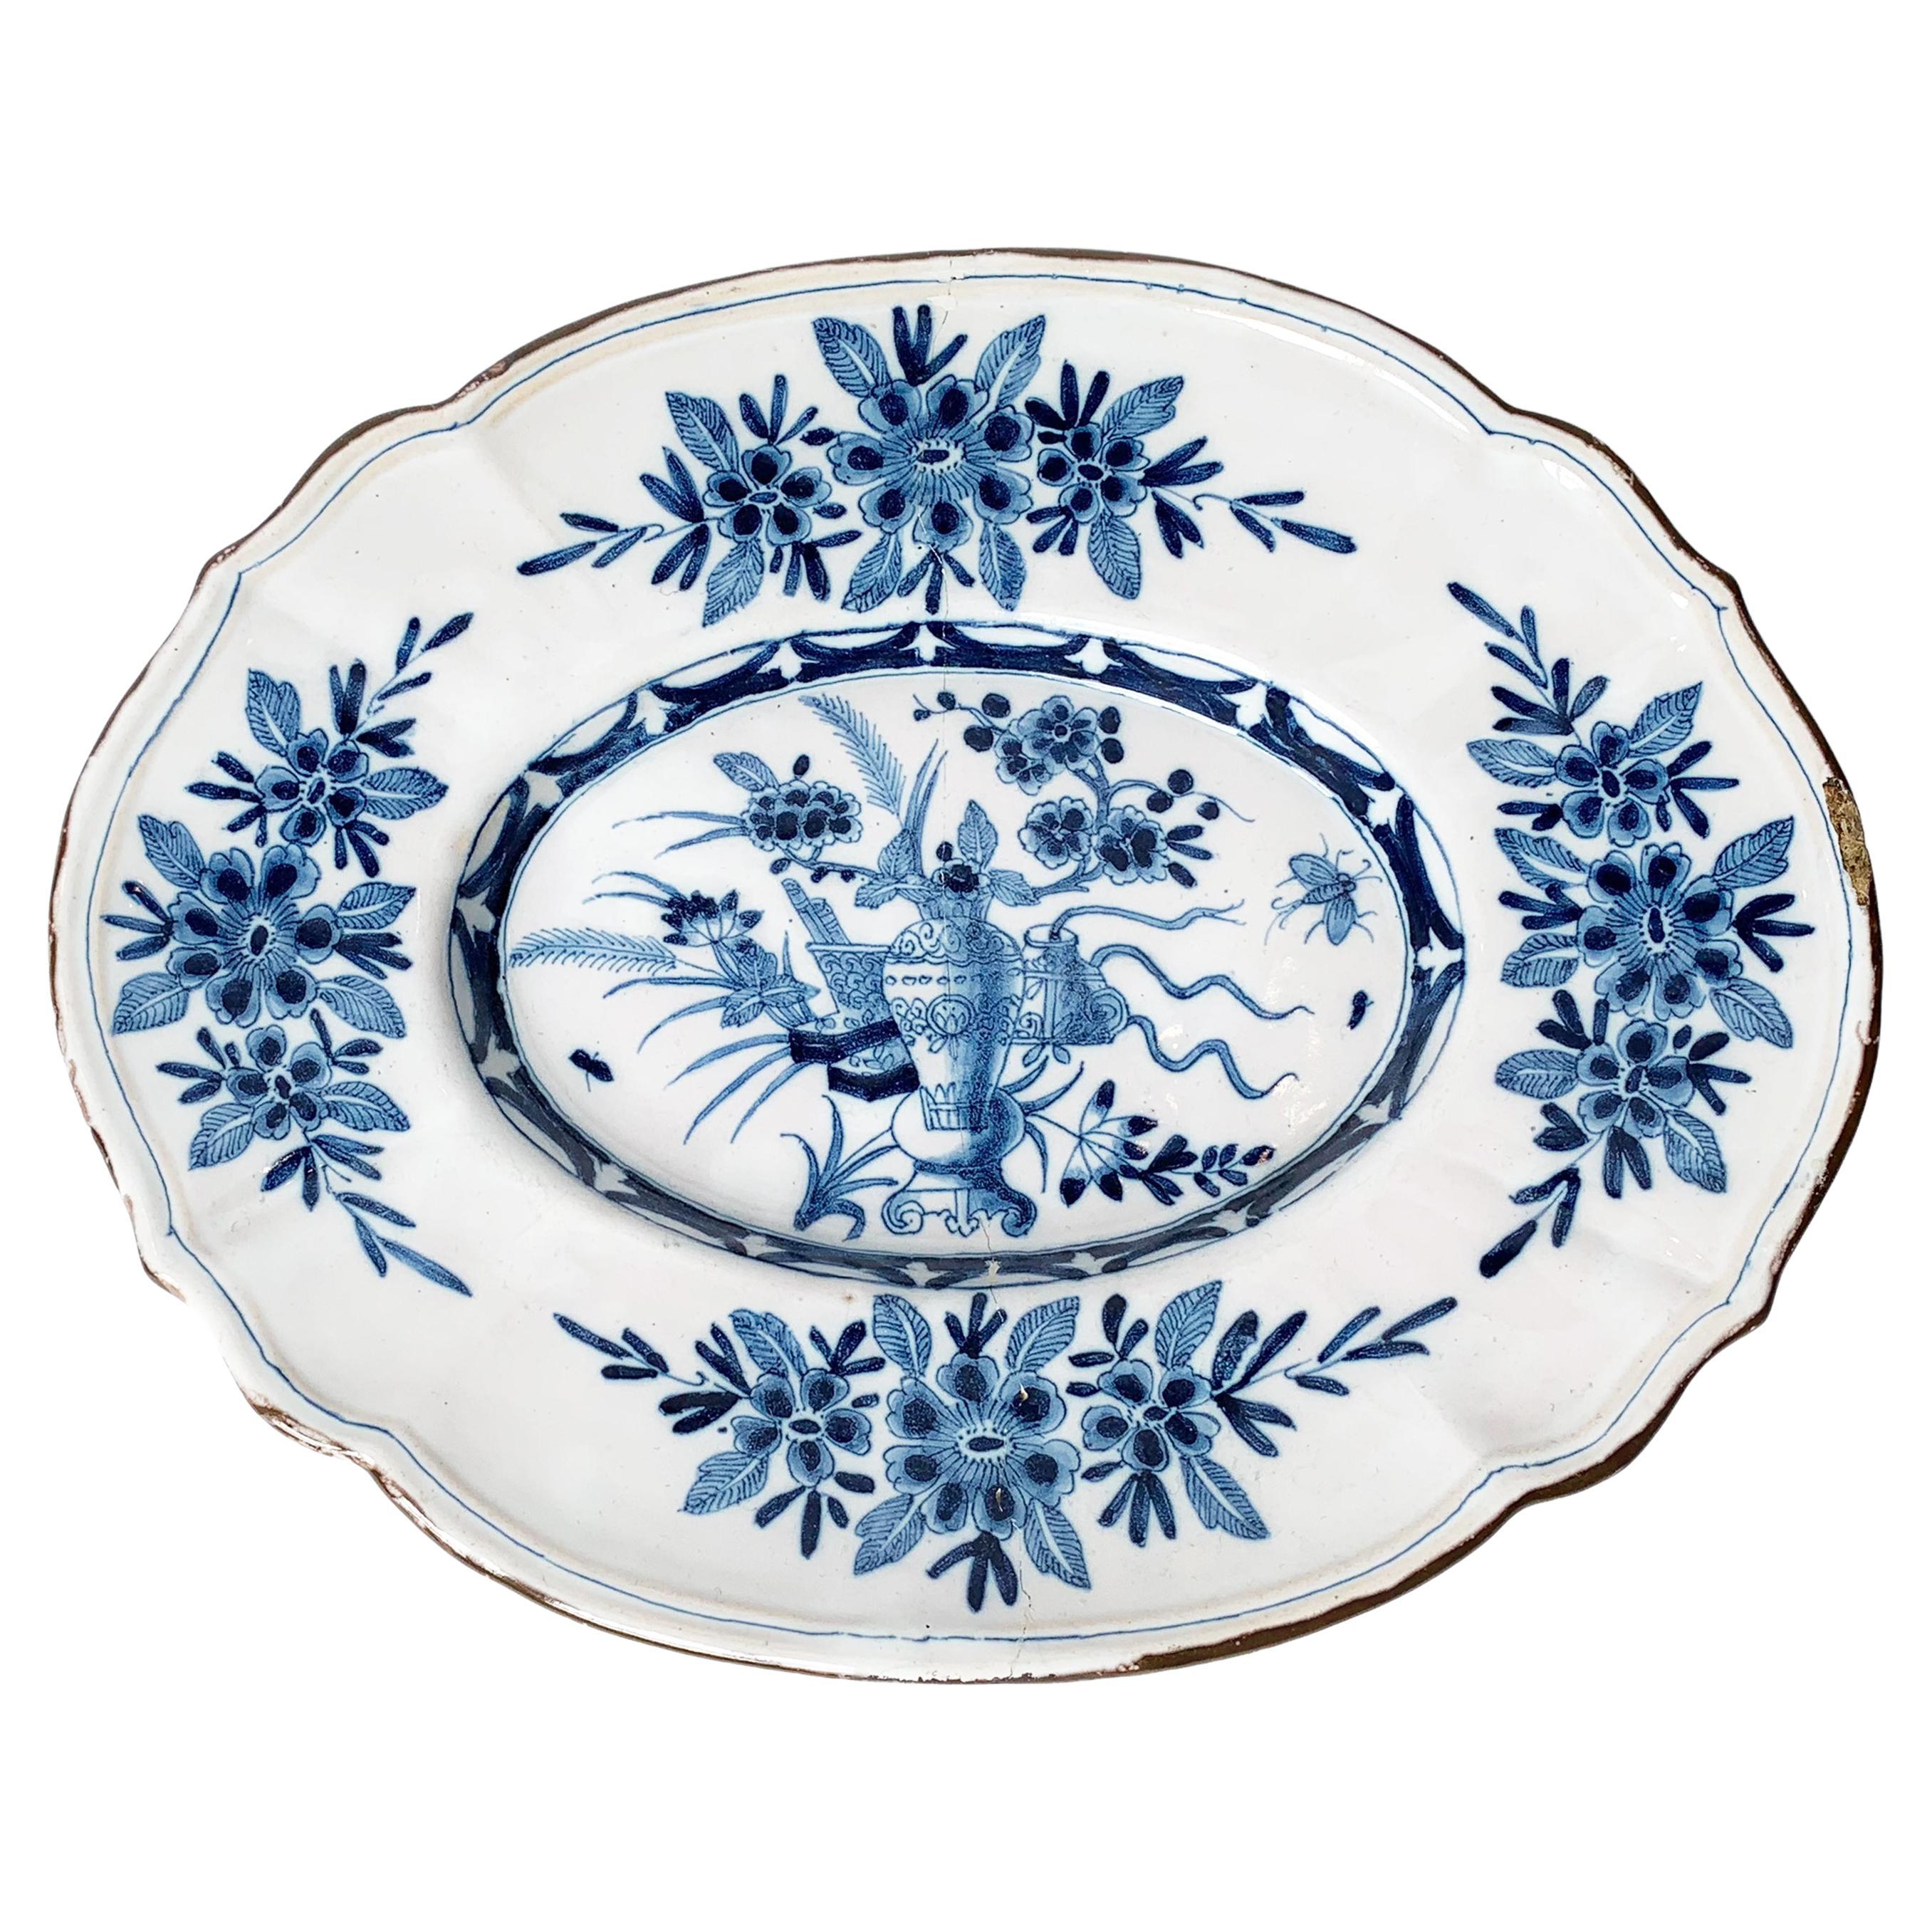 Maiolica Oval Tray, Felice Clerici Manufactory, Milan, Circa 1770-1780 For Sale